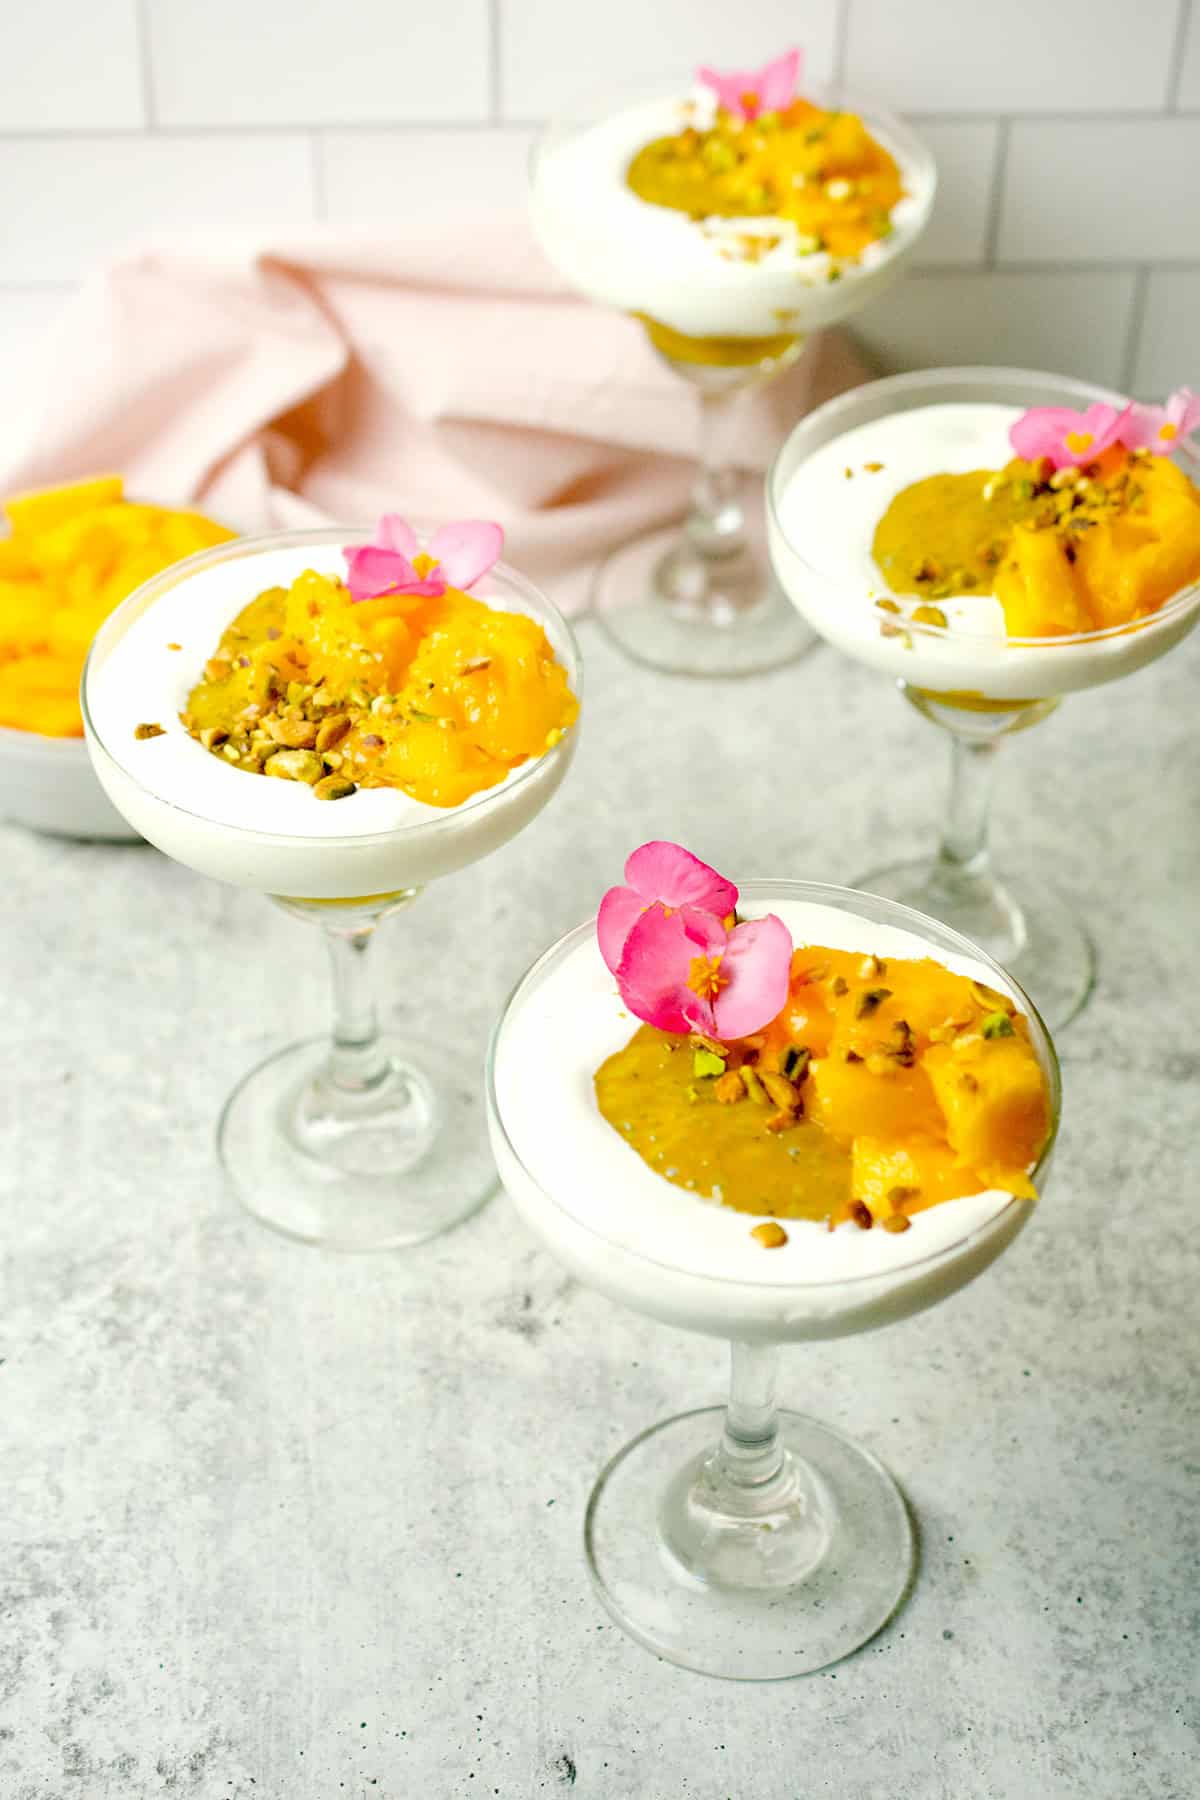 An array of stemmed glasses filled with a mango dessert and garnished with a pink flower are ready to be served.